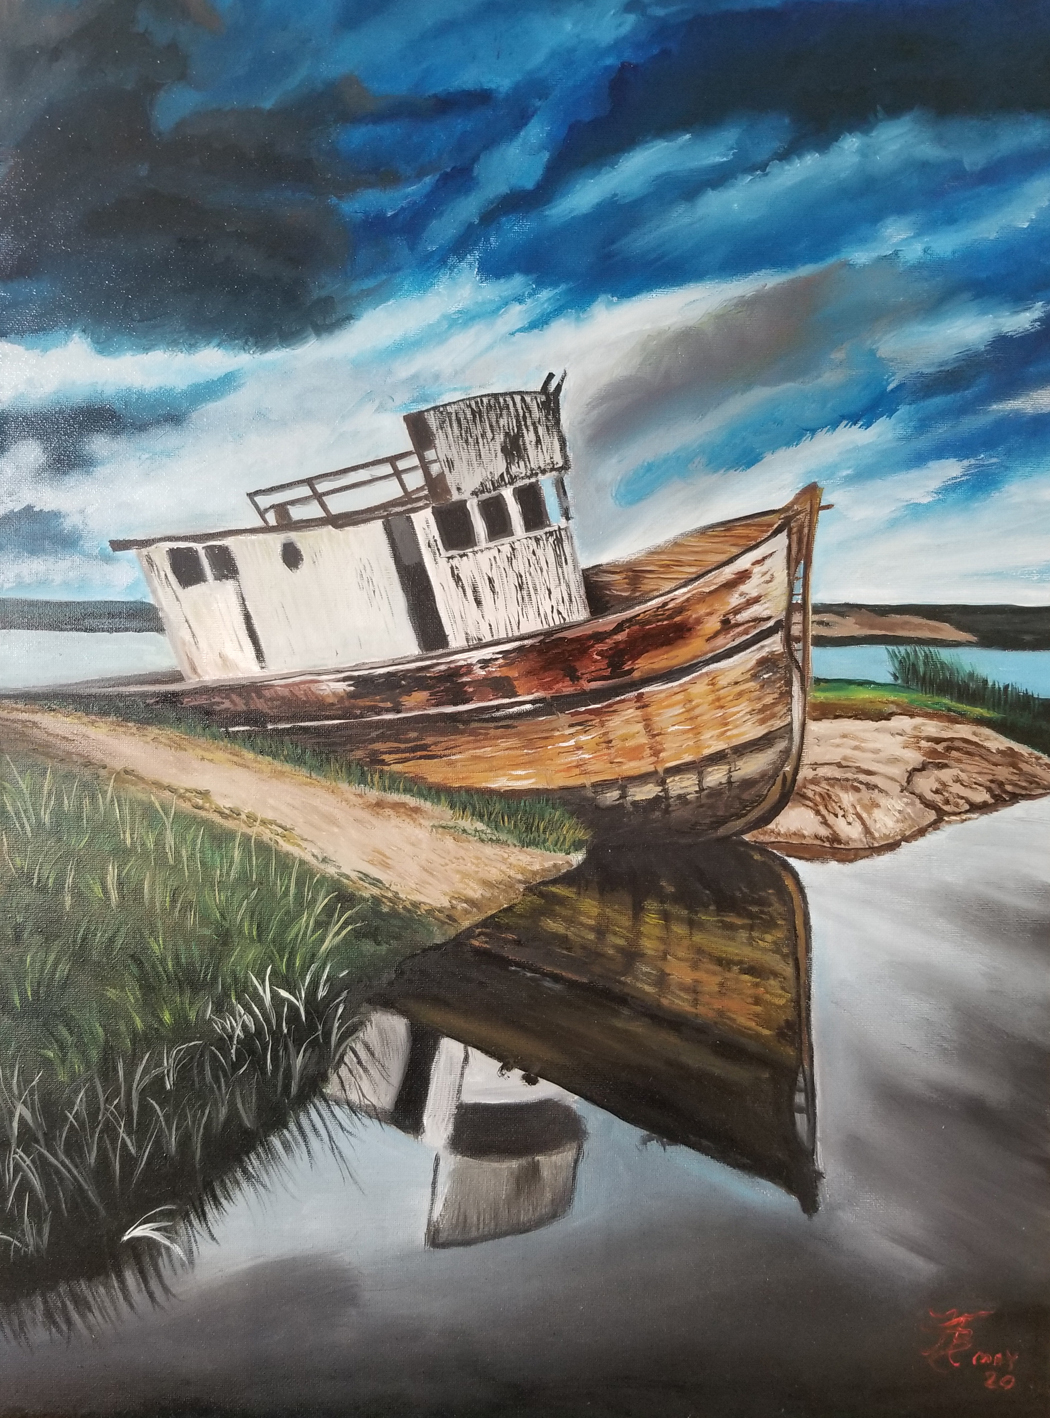 WO Fred Trainor, of Ottawa’s 764 Squadron, recently contributed his painting entitled ‘Shipwrecked’ to the Steel Spirit art project. Steel Spirit was founded by military wife and former paramedic Barbara Brown in 2017. Steel Spirit showcases the artwork of currently serving and former military members and first responders.